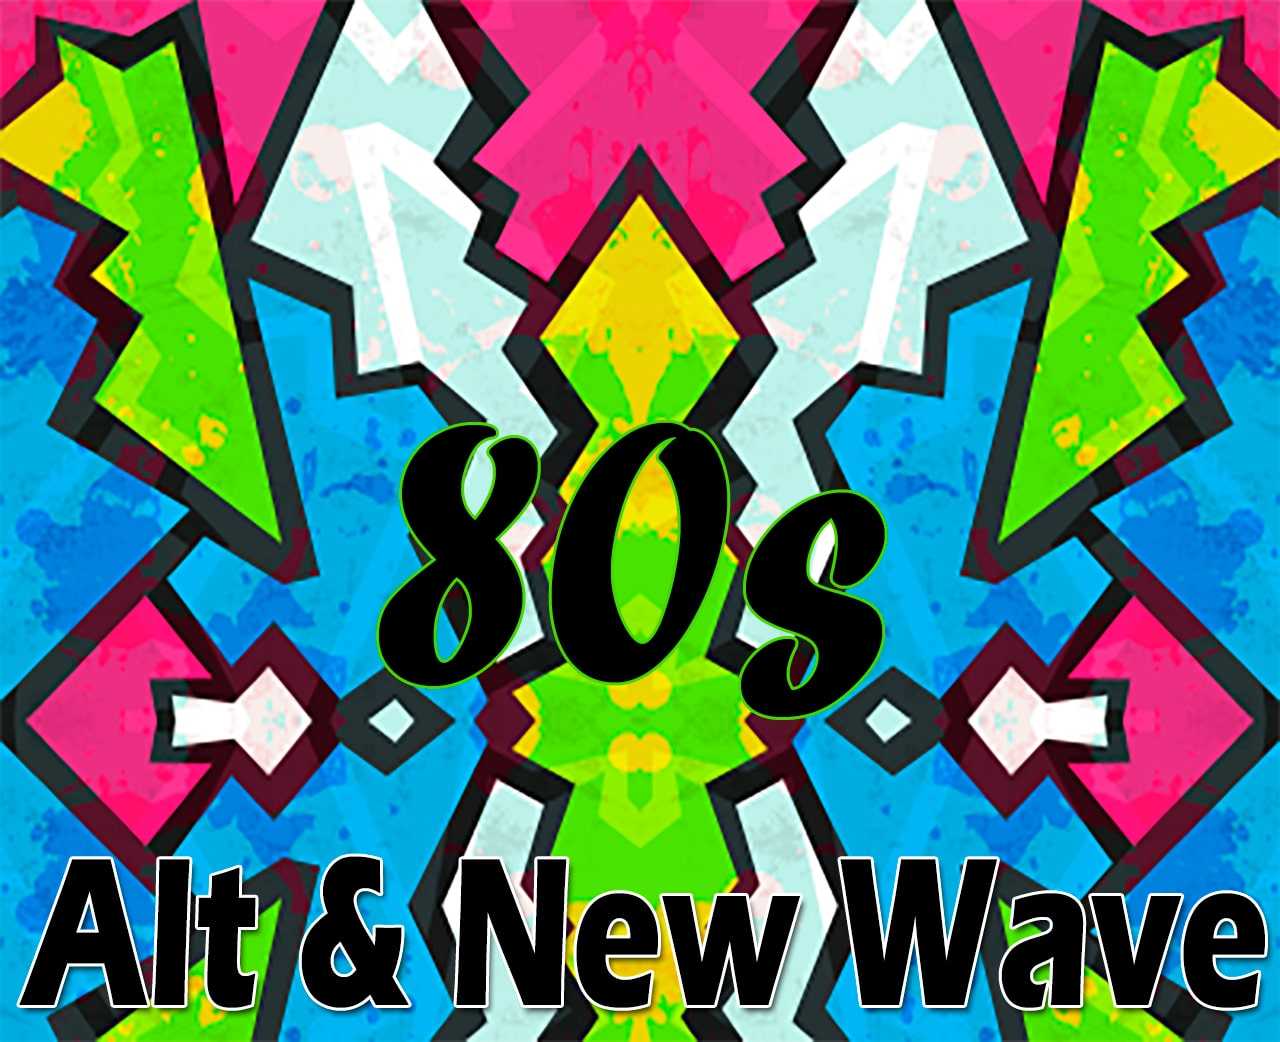 New wave 4270